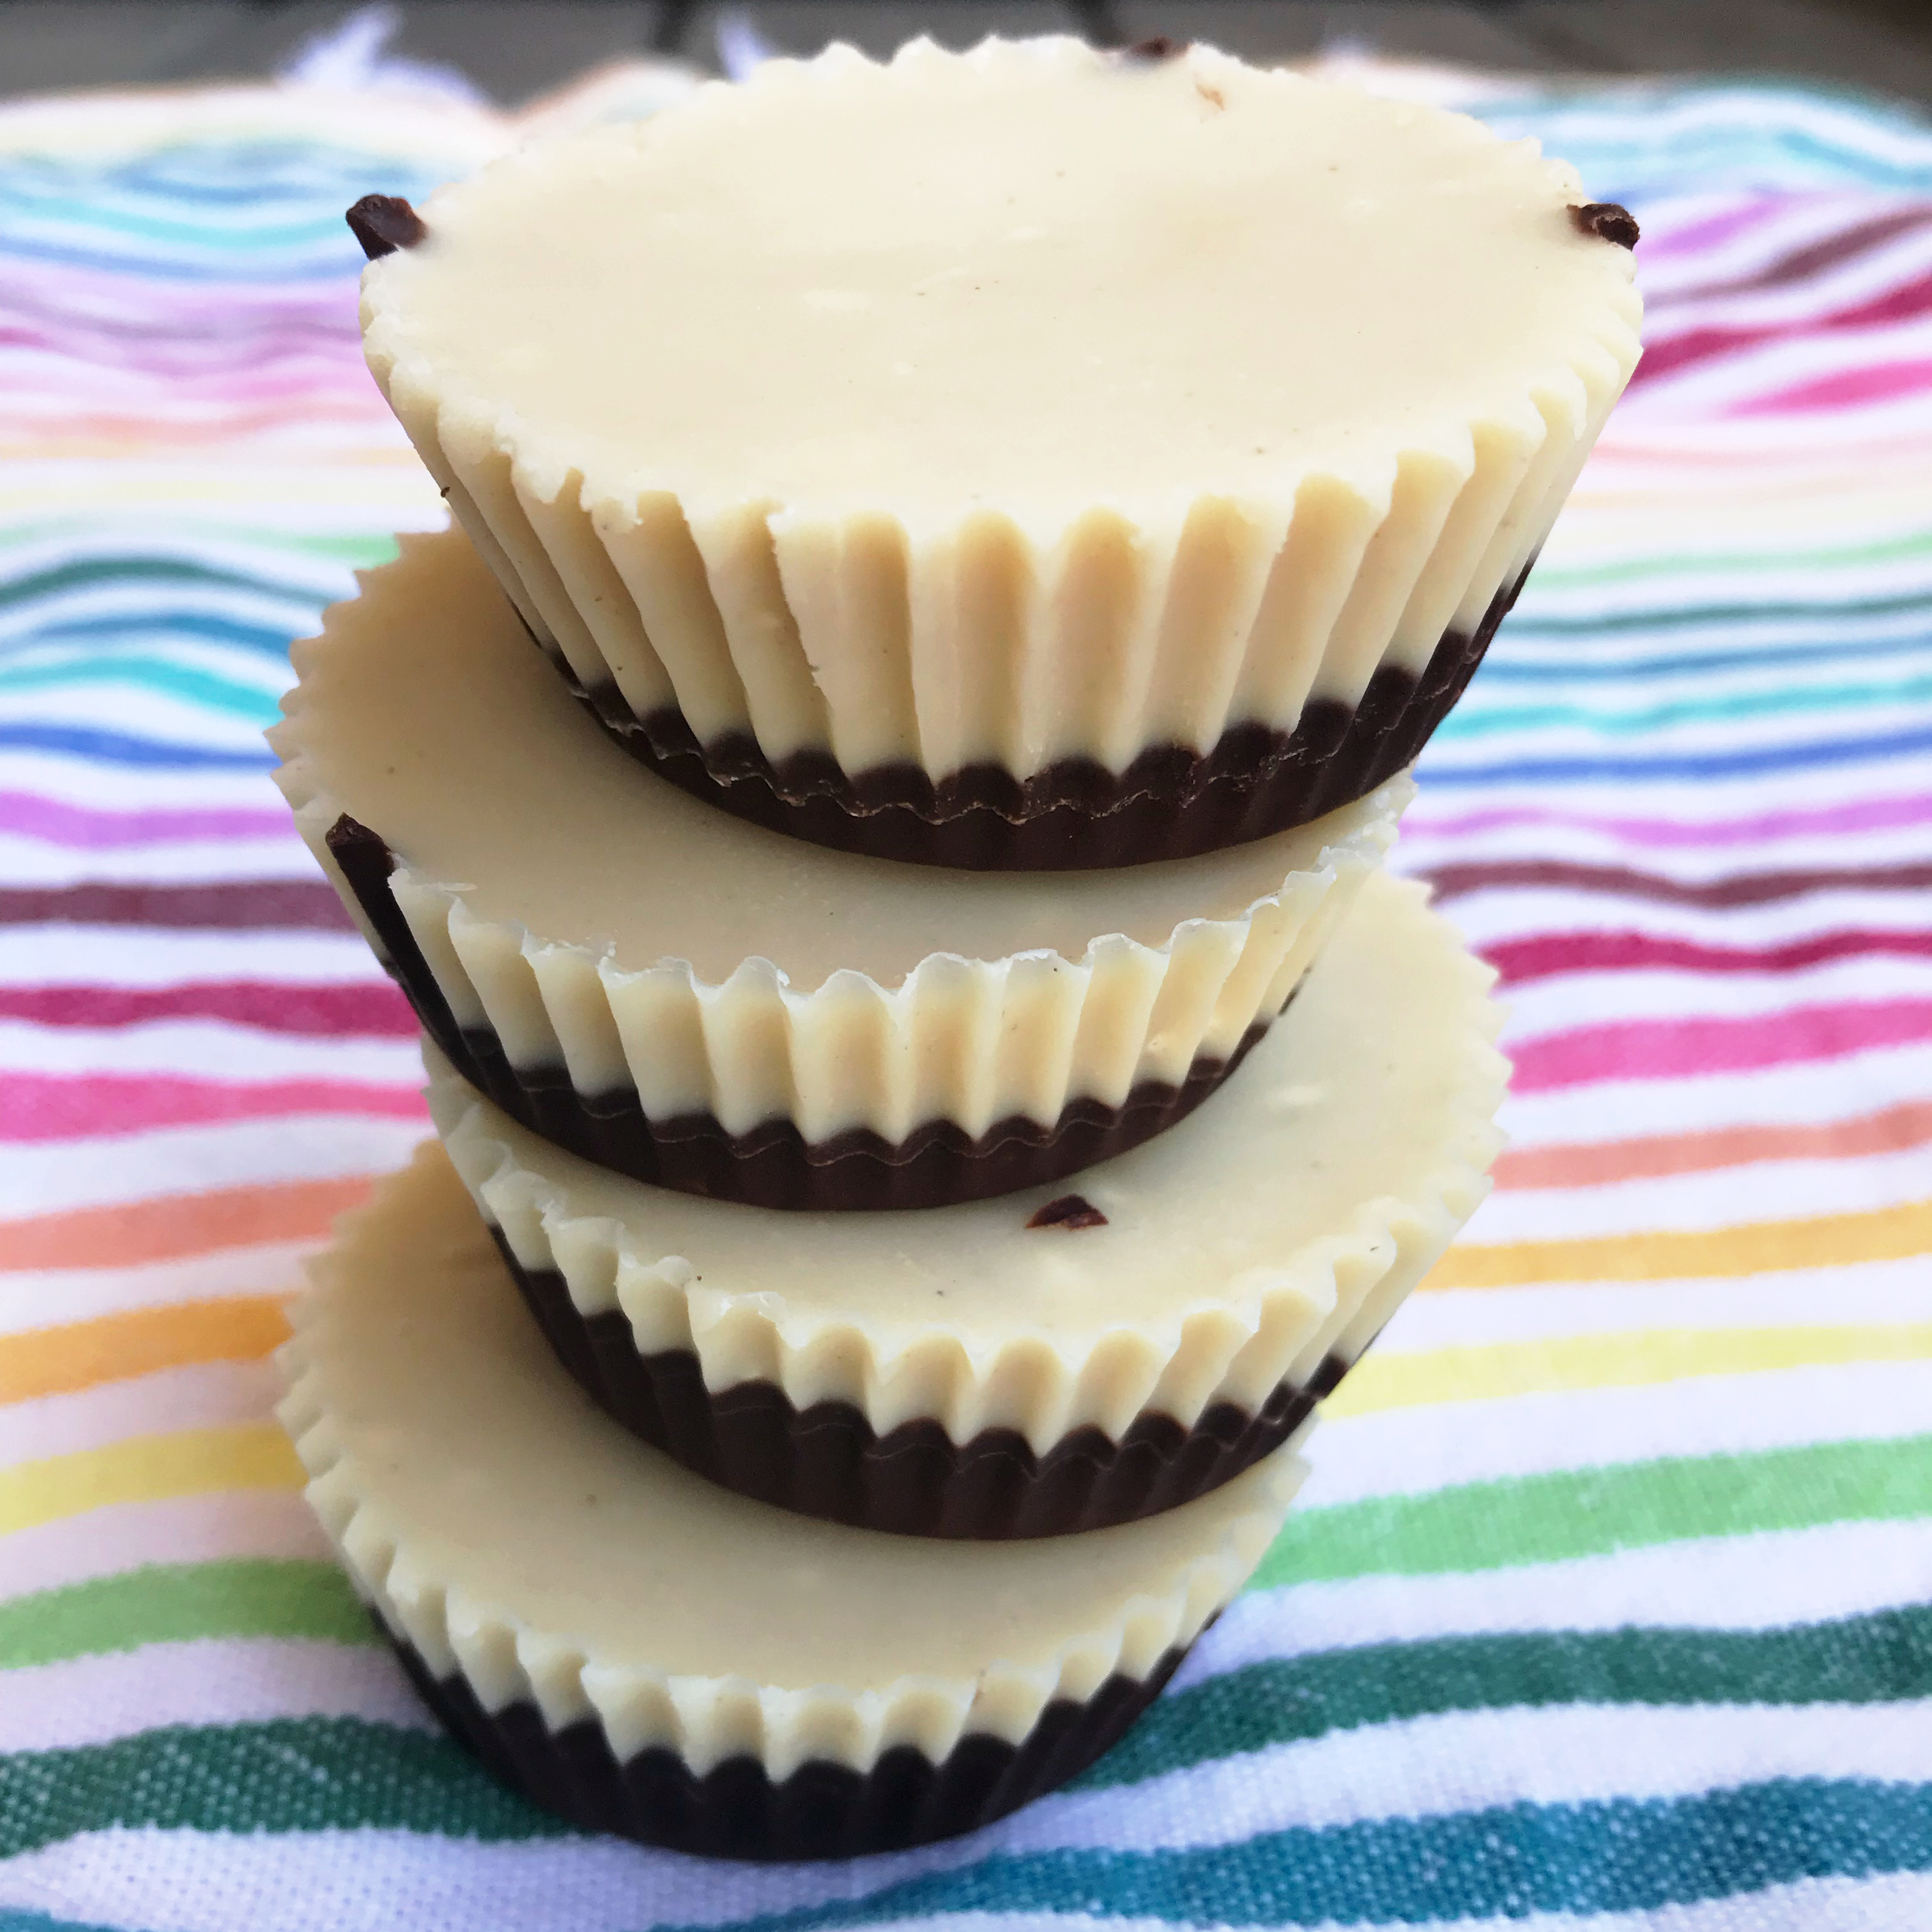 Chocolate Coconut Butter Cups - Eat Your Way Clean